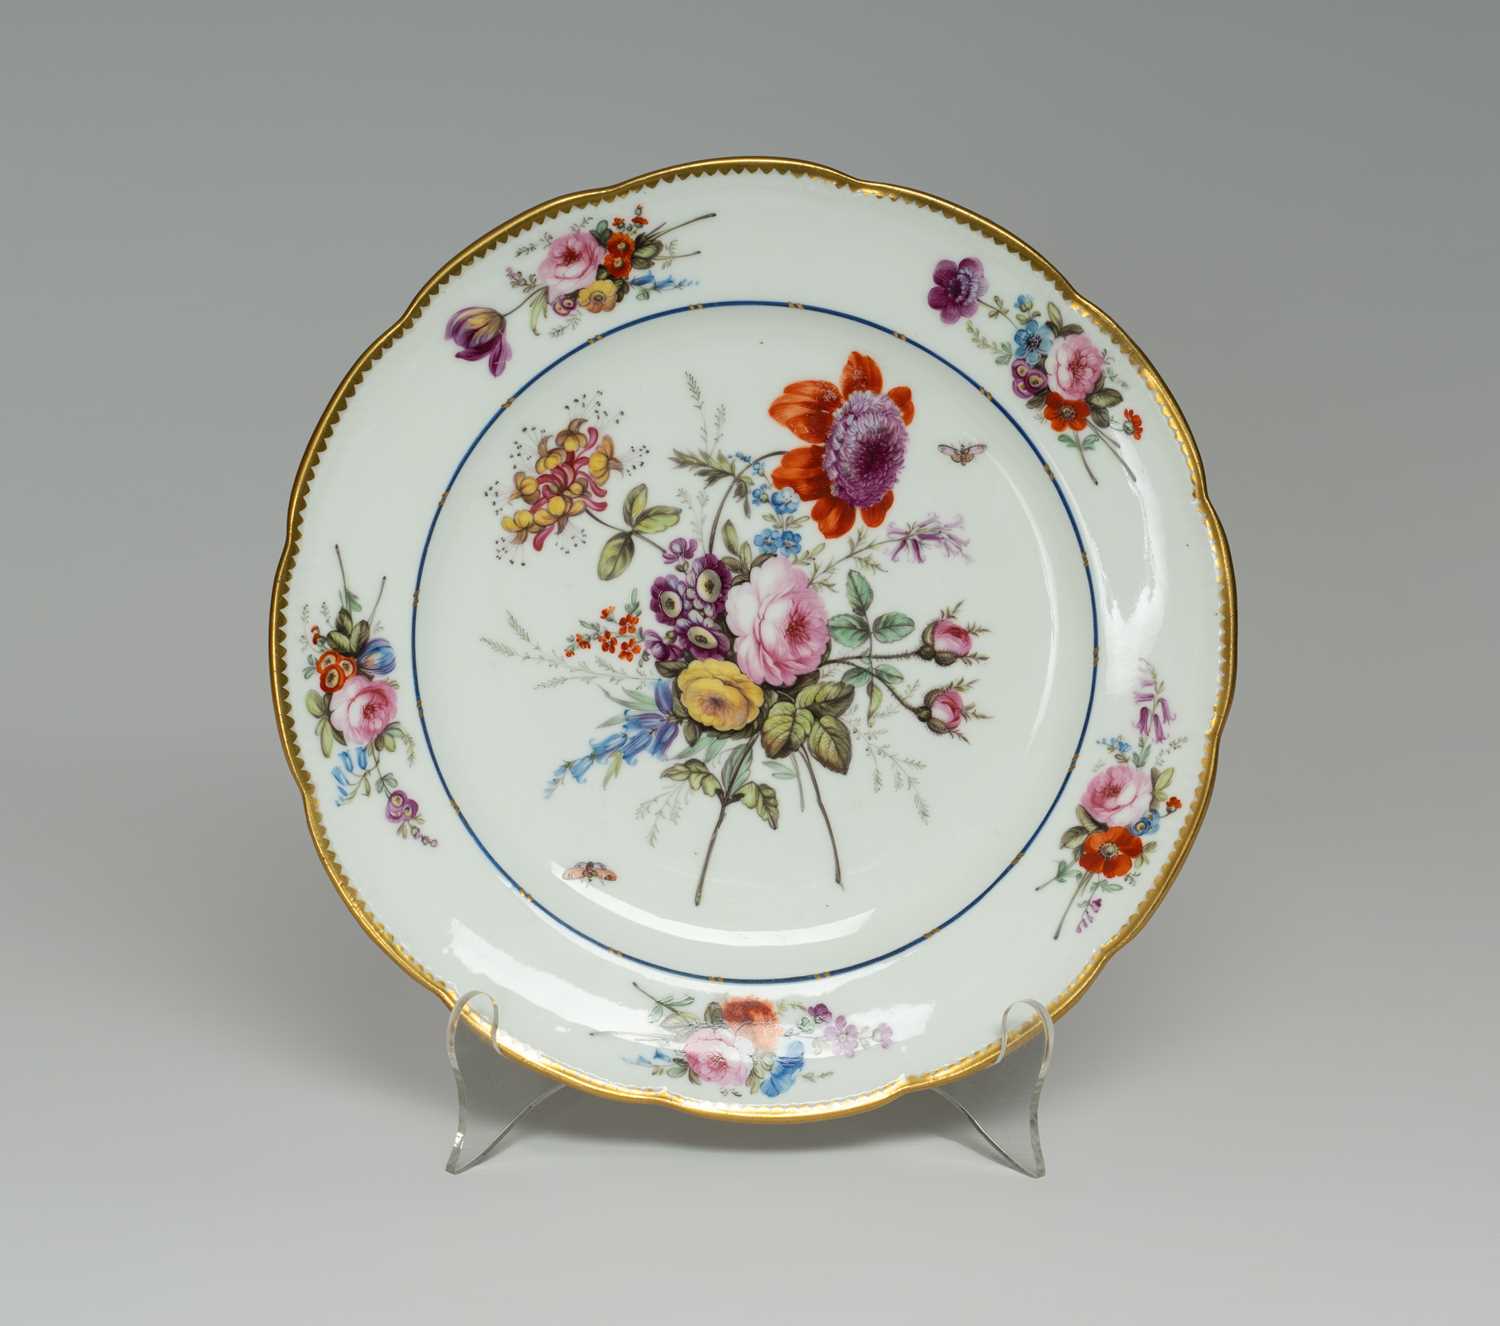 NANTGARW PORCELAIN PLATE circa 1817-1820. non-moulded border, decorated with large full floral spray